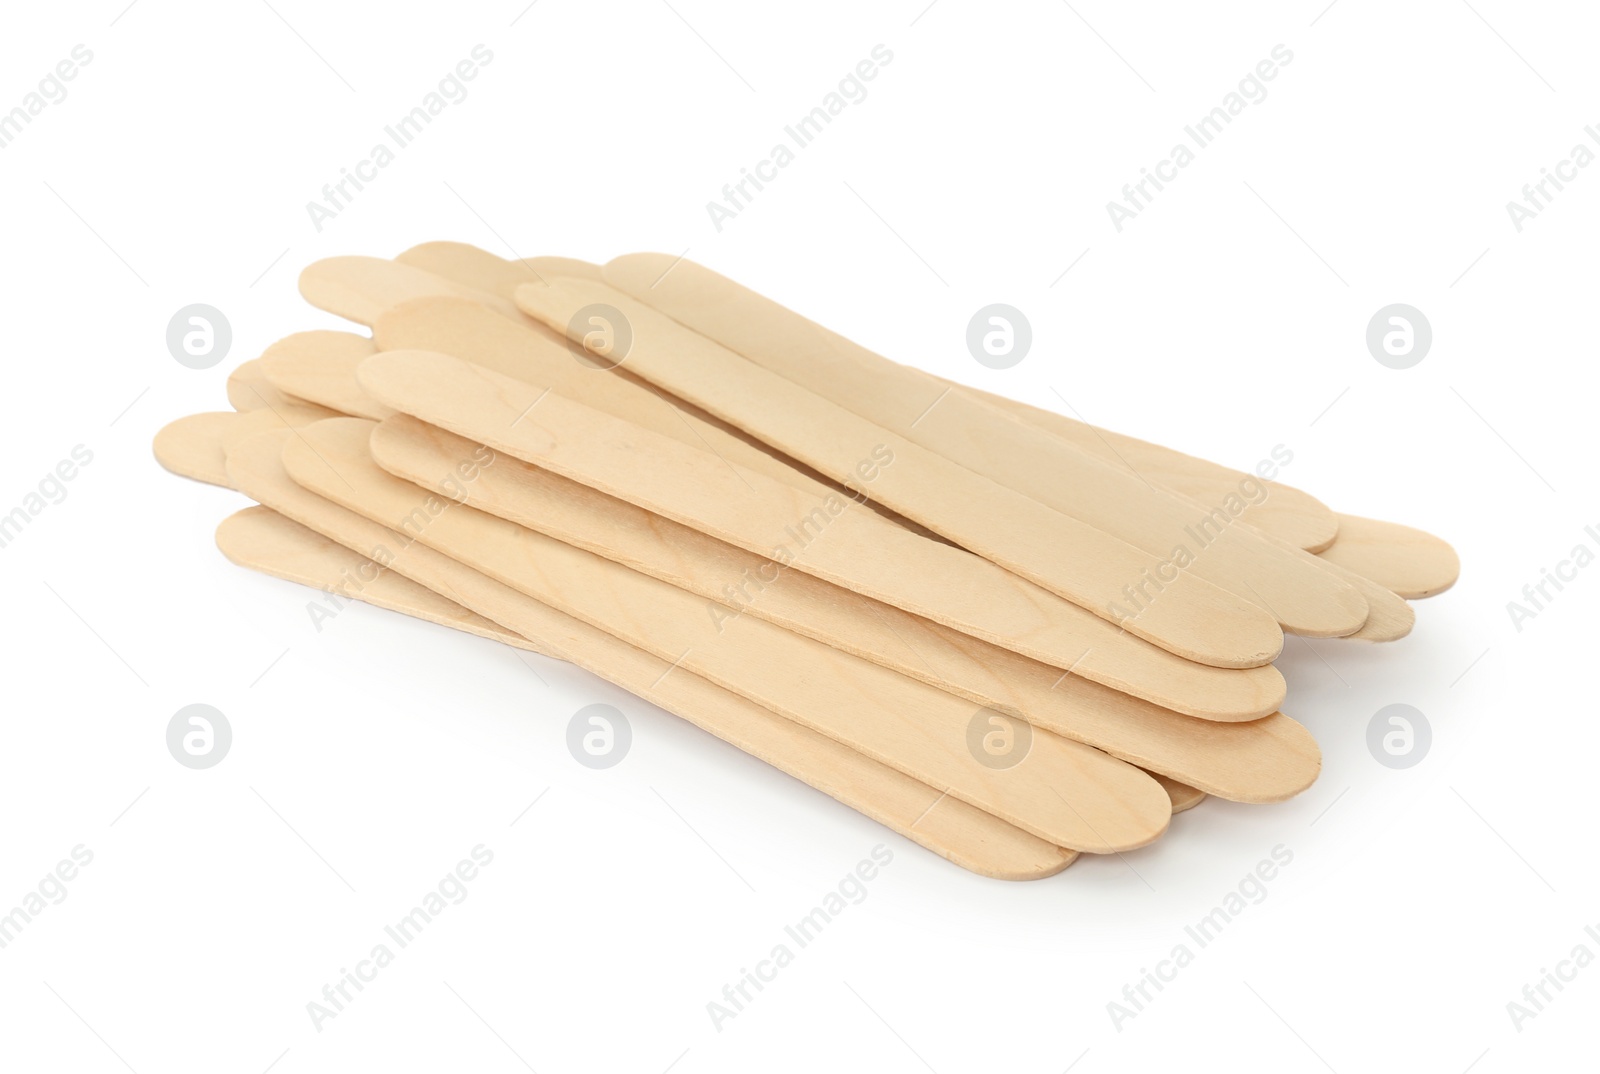 Photo of Disposable wooden spatulas for depilatory wax on white background